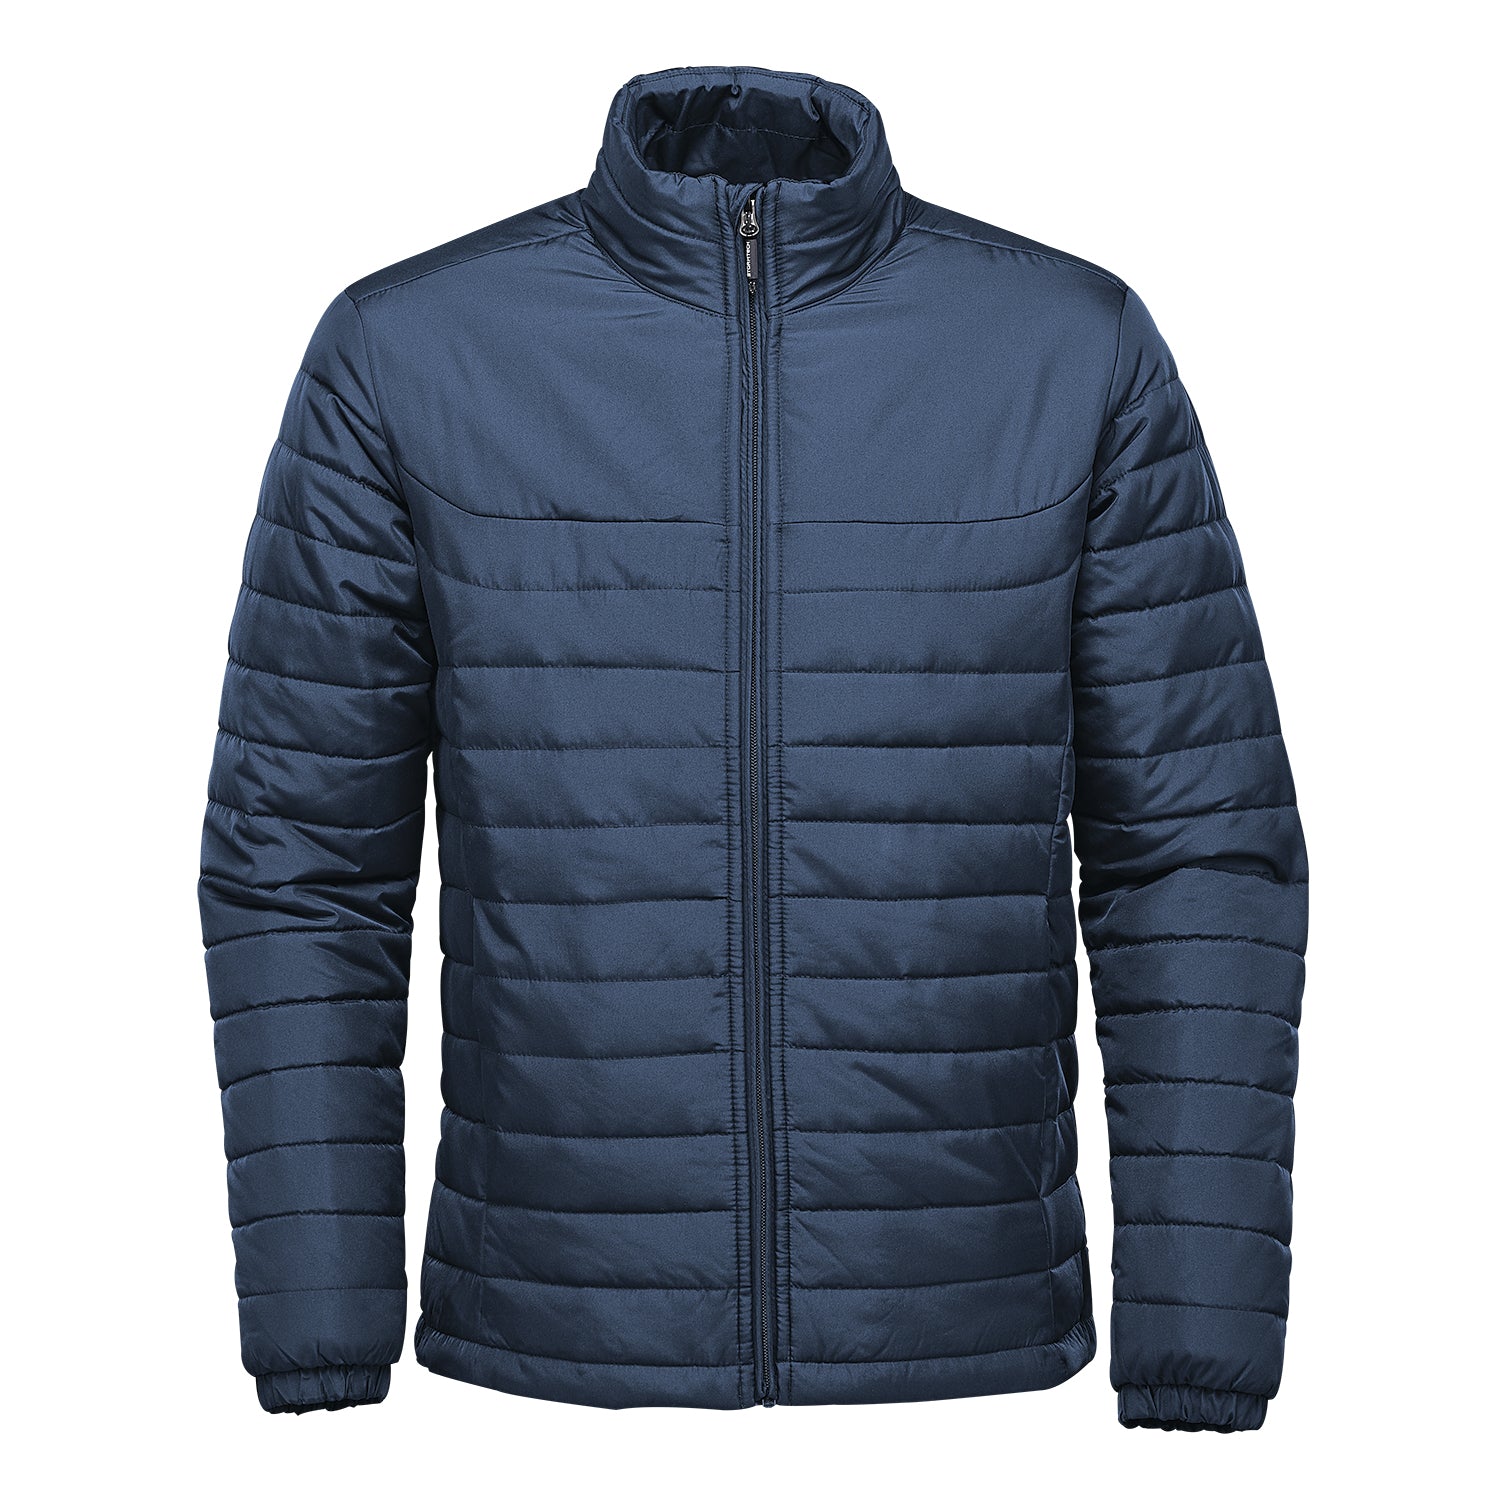 Thermal quilted jacket